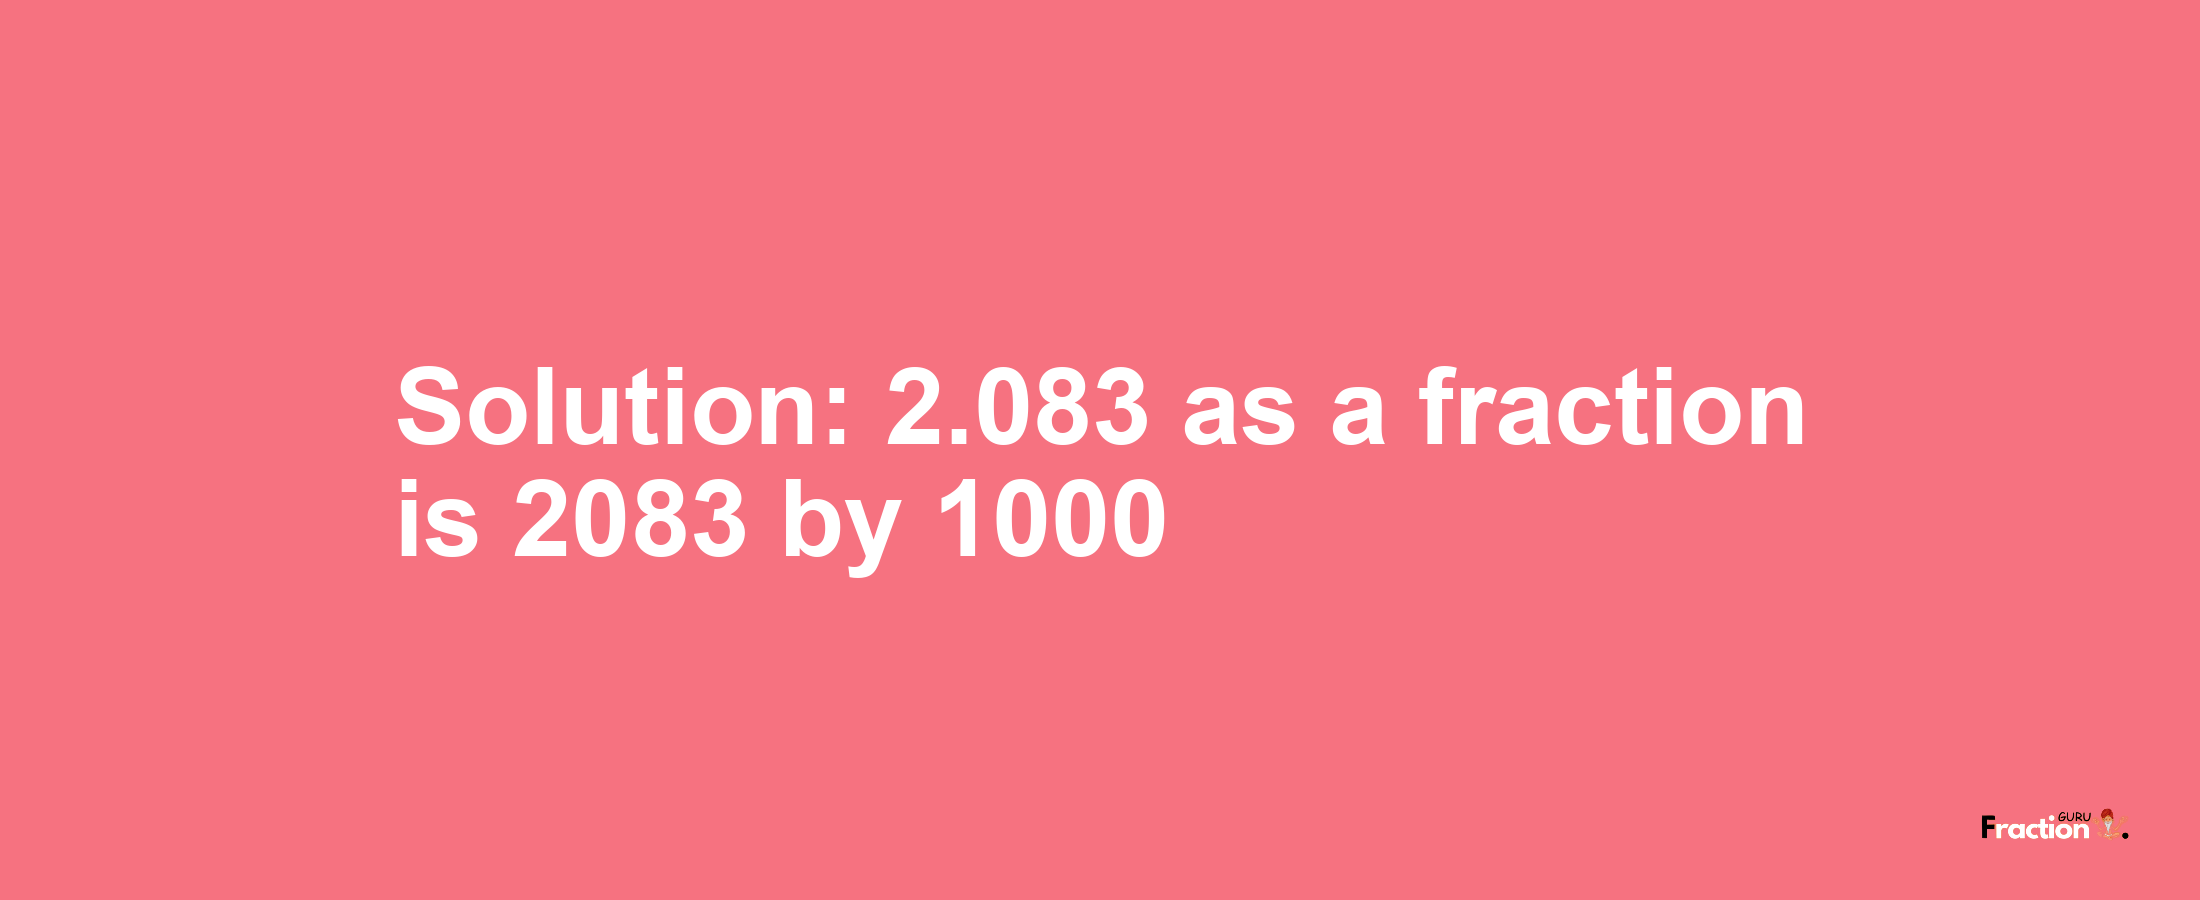 Solution:2.083 as a fraction is 2083/1000